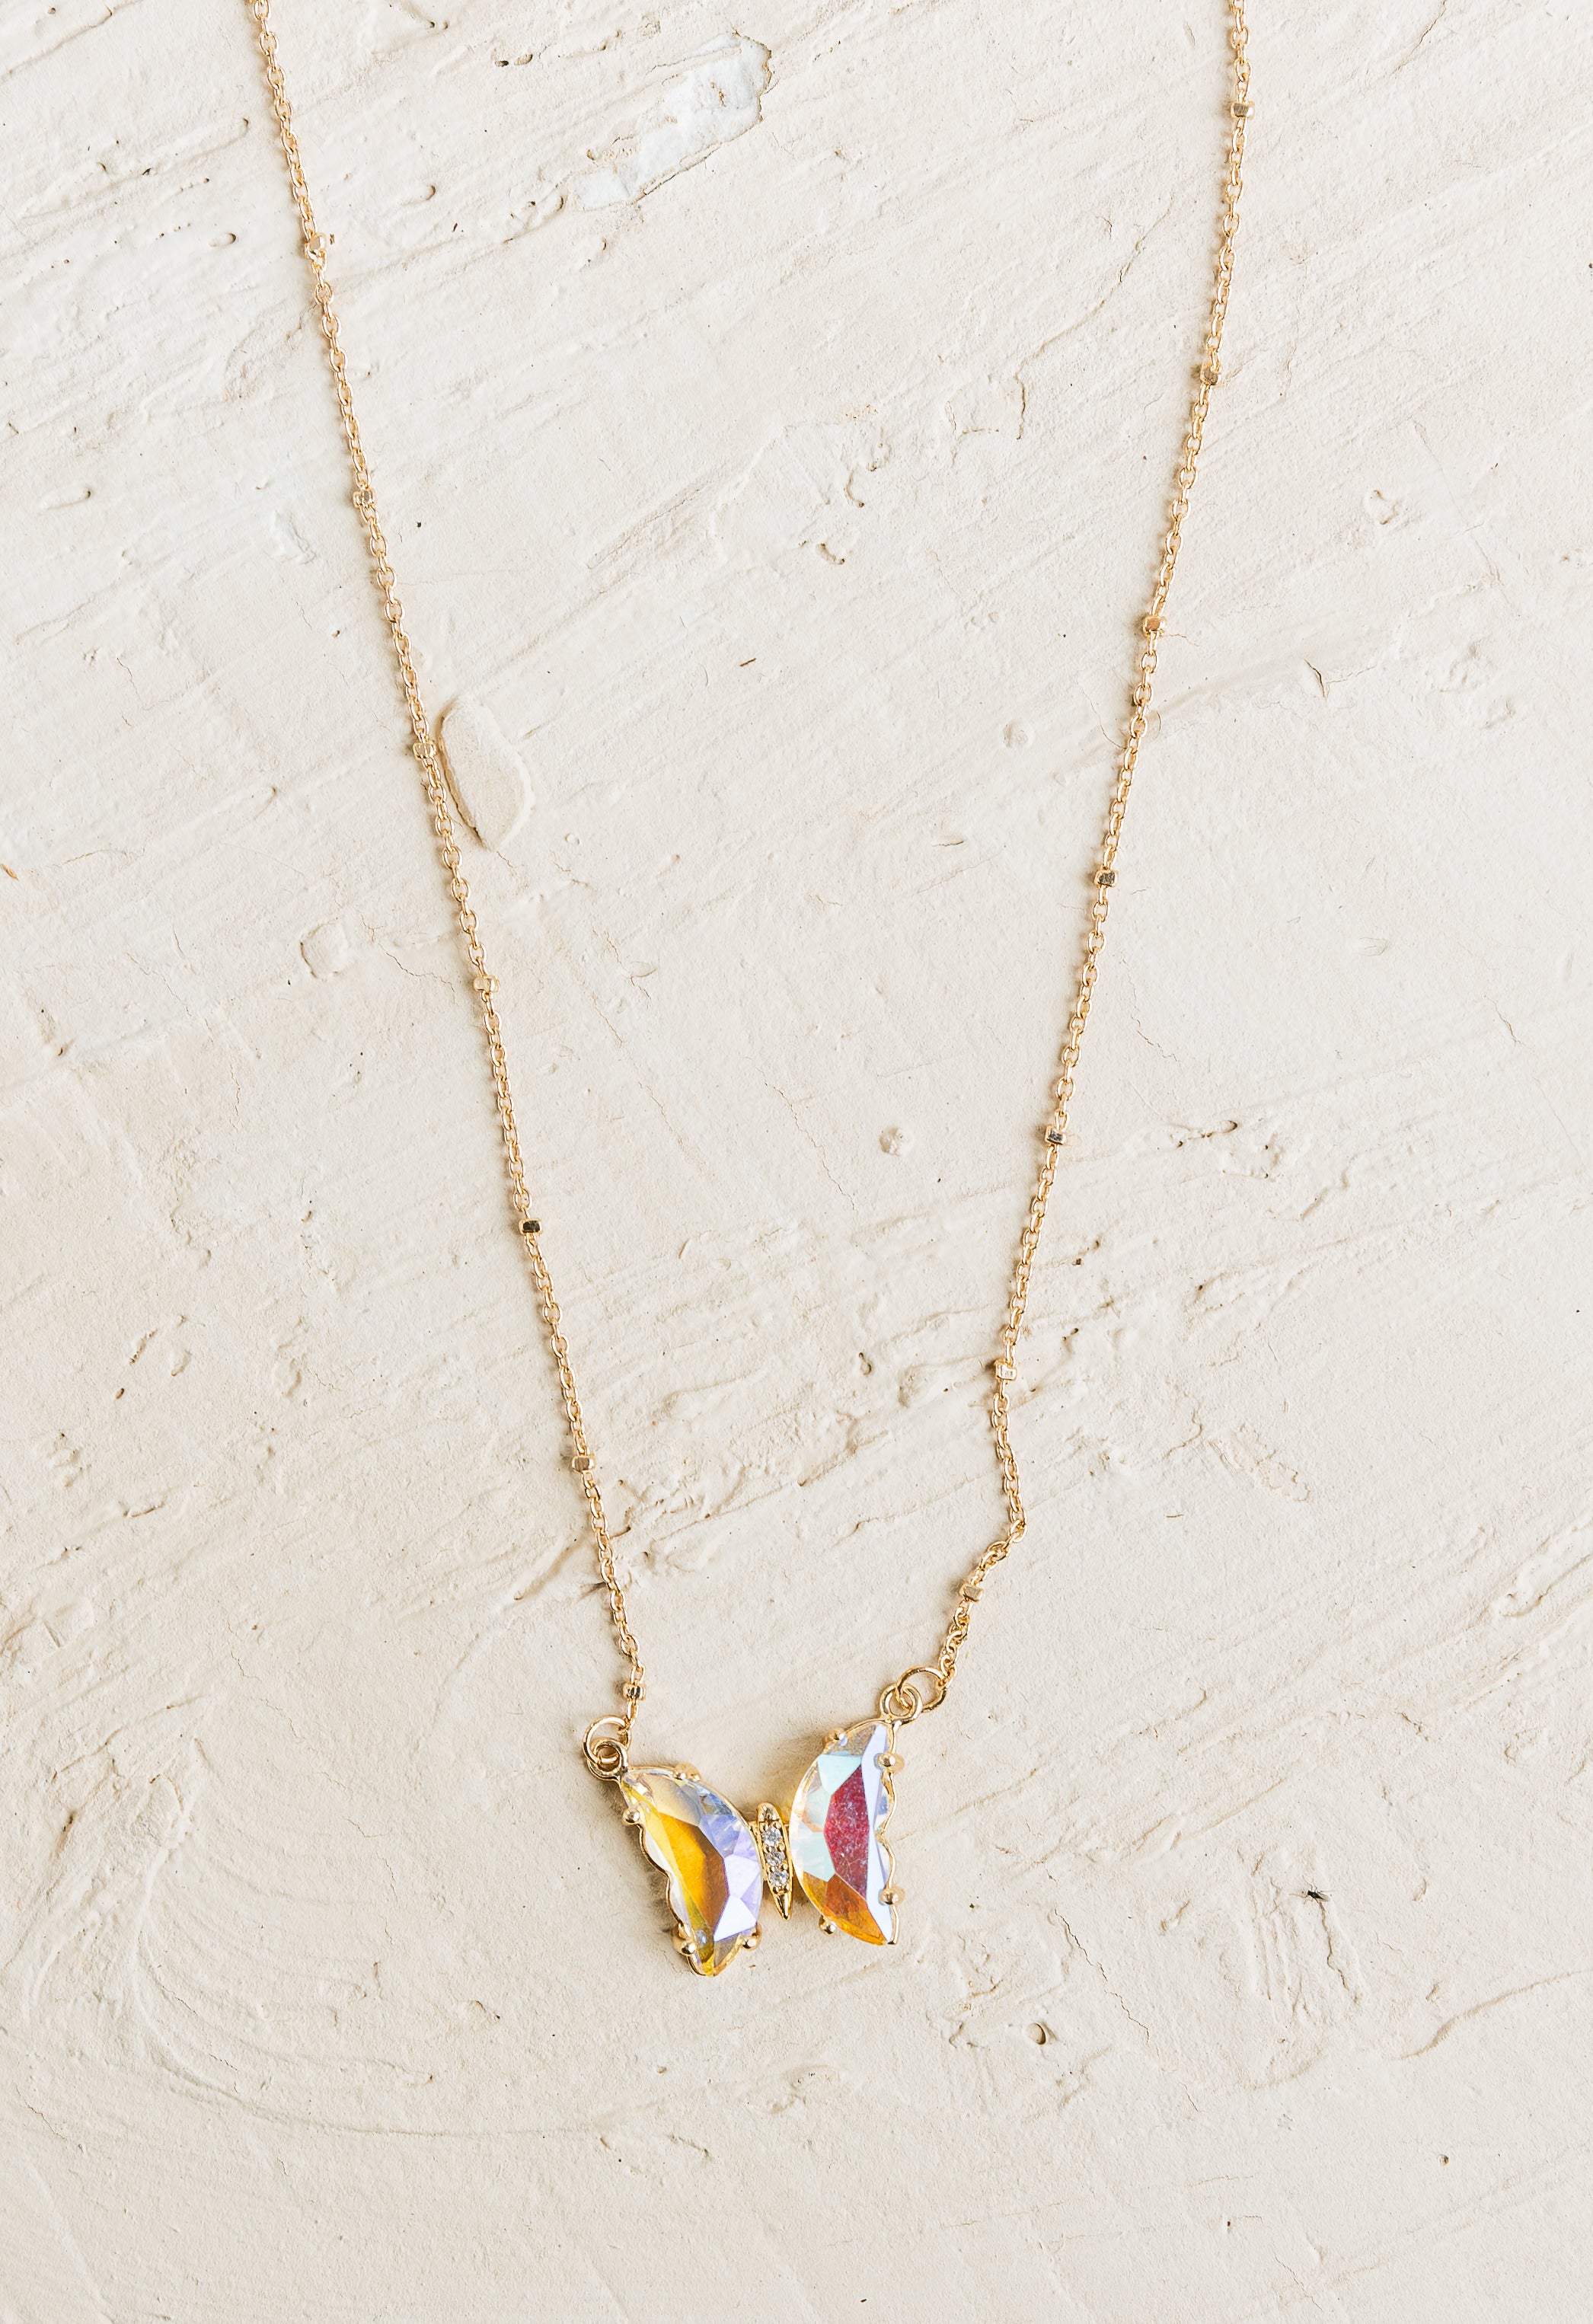 Chrysalis Necklace - GOLD - willows clothing NECKLACES